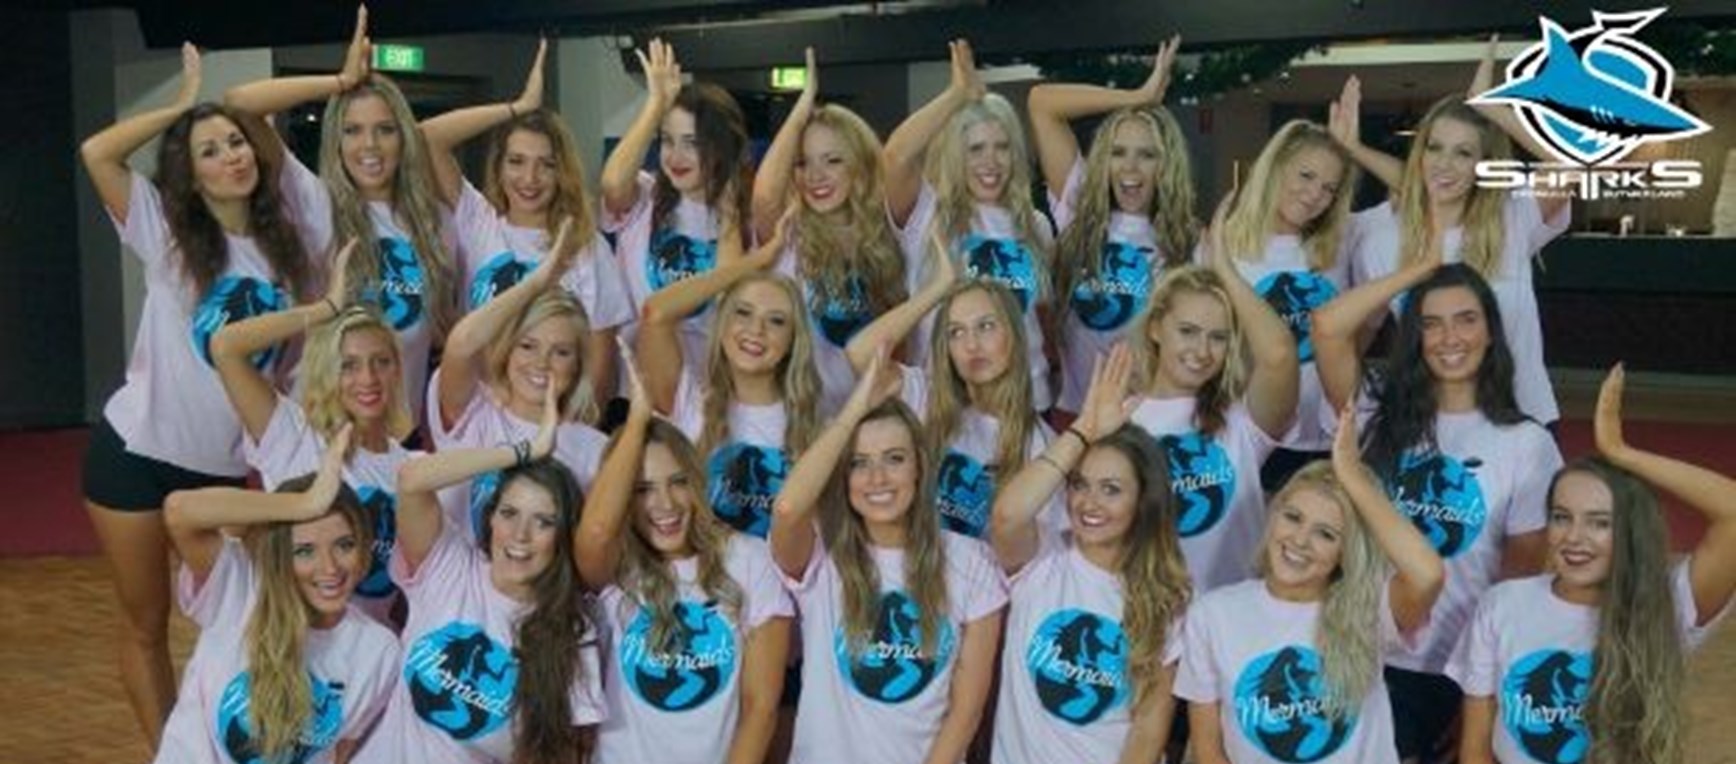 MERMAID AUDITIONS | Your 2016 squad